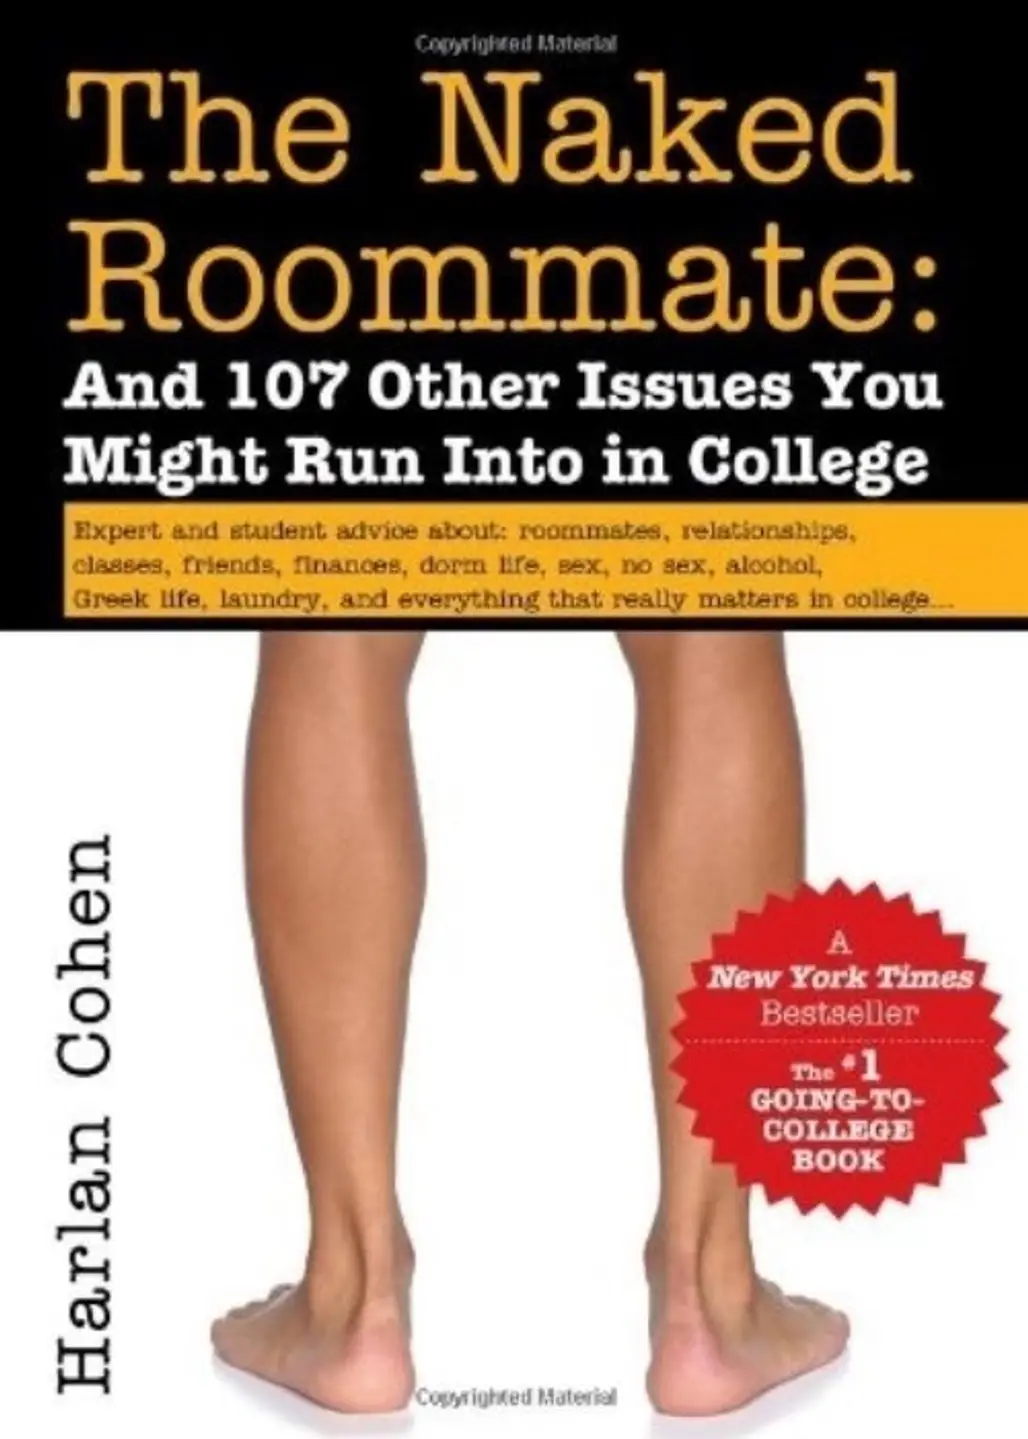 The Naked Roommate- Harlan Cohen